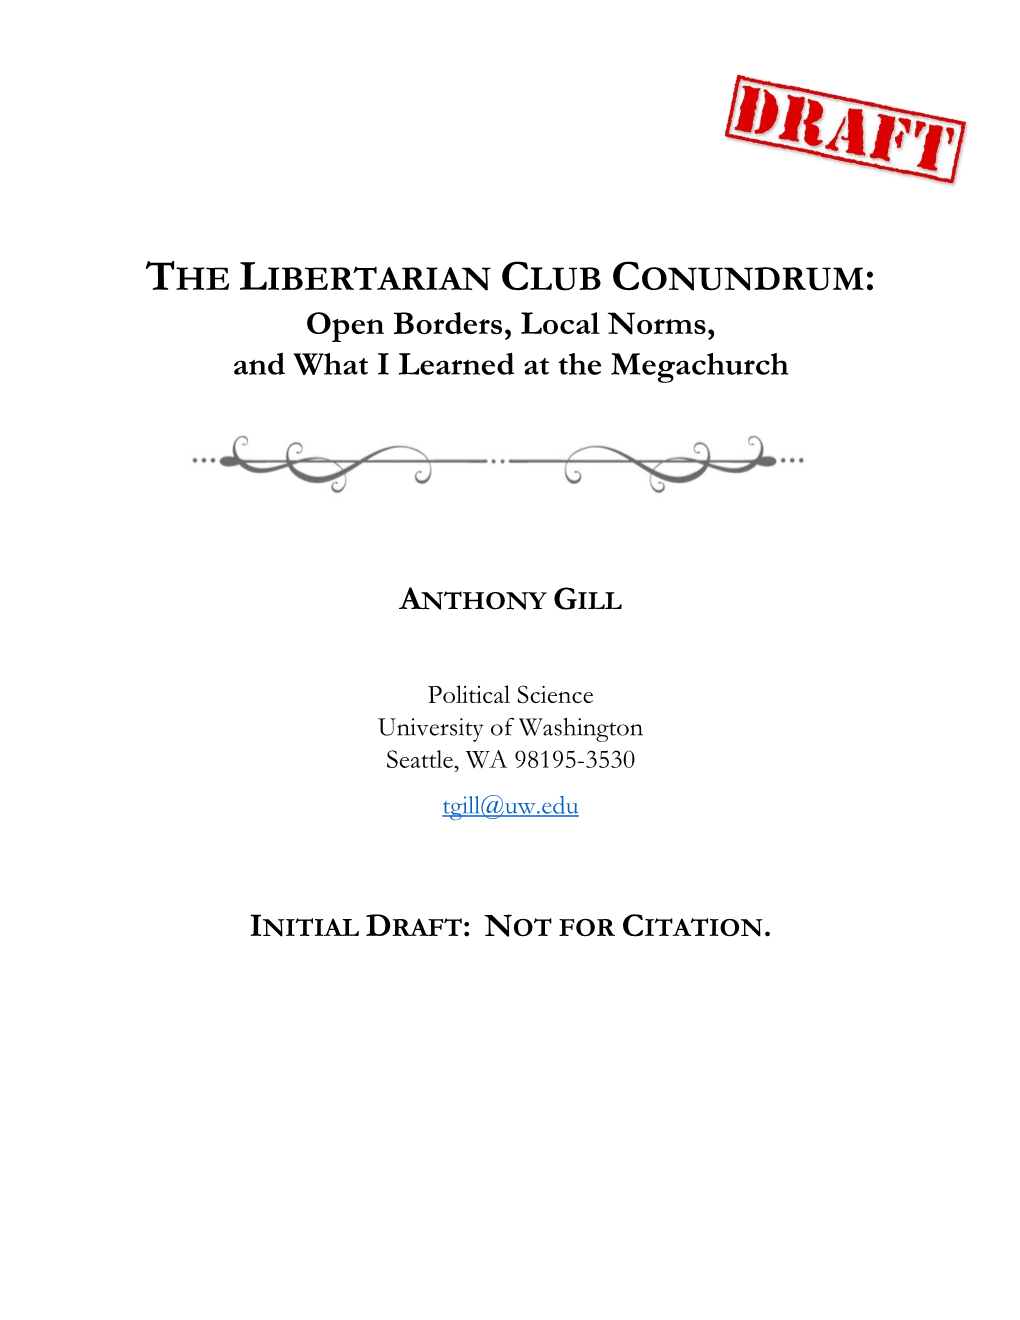 THE LIBERTARIAN CLUB CONUNDRUM: Open Borders, Local Norms, and What I Learned at the Megachurch